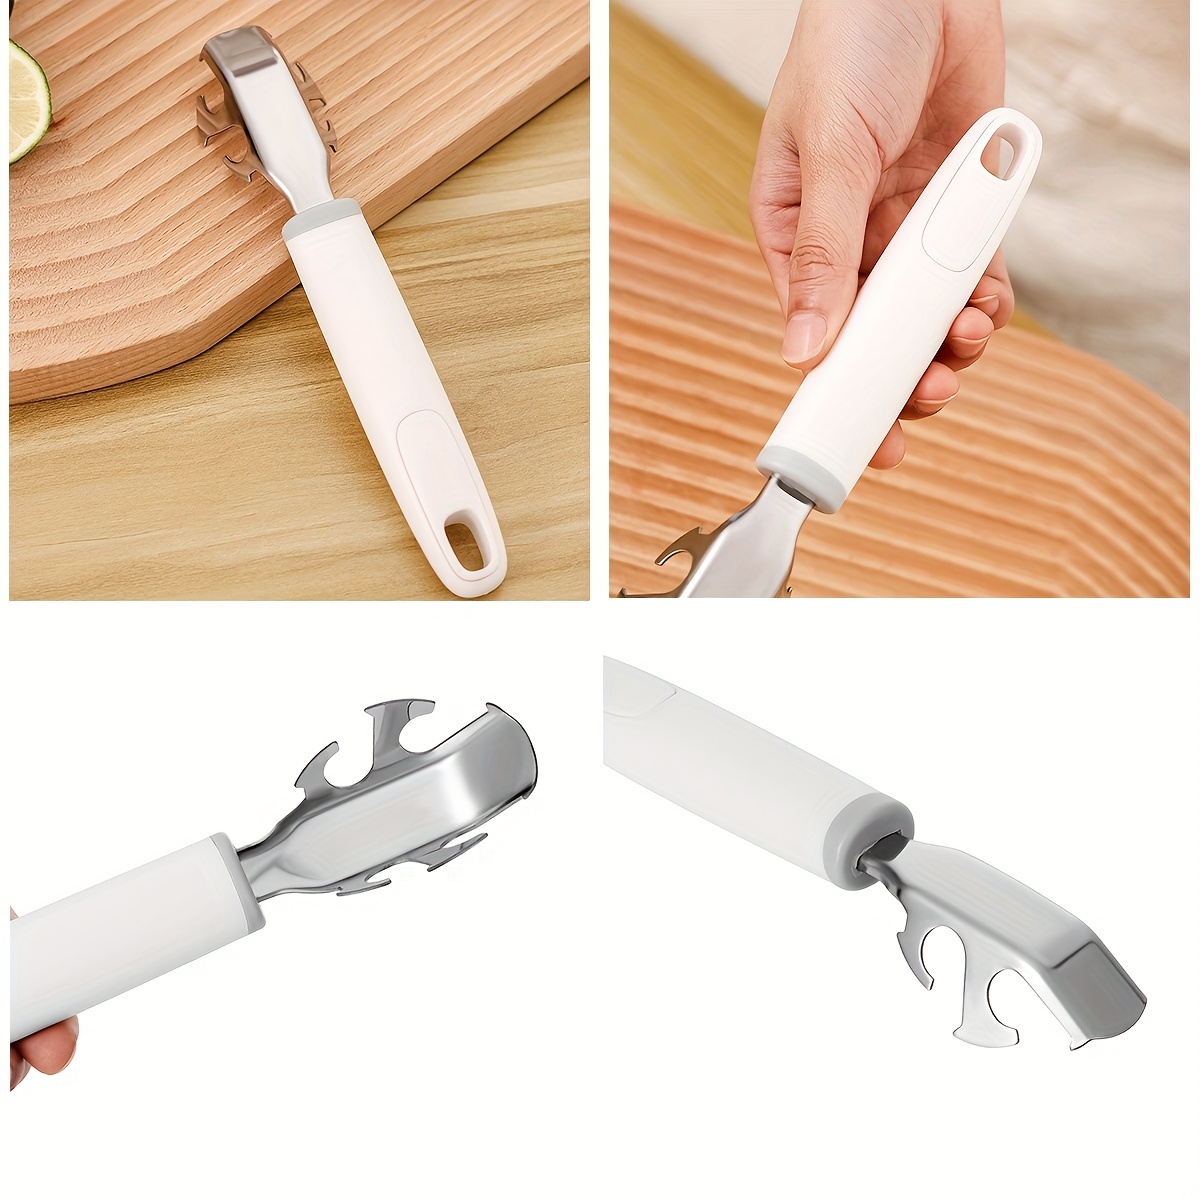 RUITASA Hot Plate Gripper Clips for Moving Hot Plate or Bowls with Food  Out, From Instant Pot, Microwave, Oven, Air Fryer. Accessory for Lifting  Insta